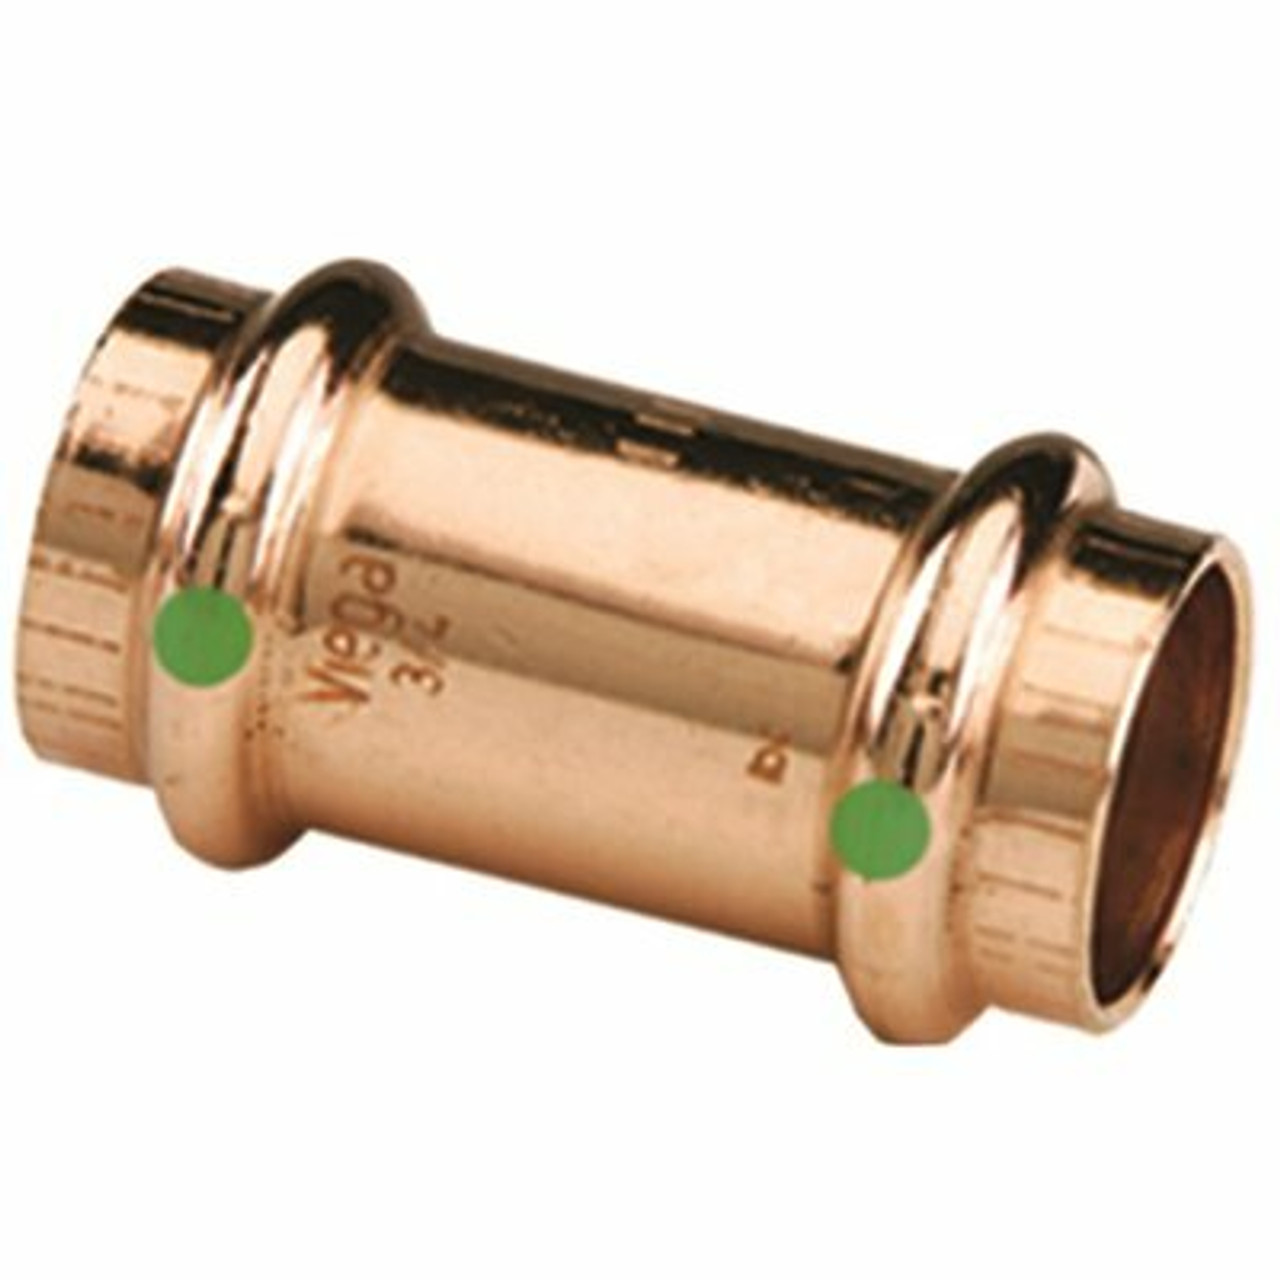 Viega 1 In. X 1 In. Copper Coupling With Stop